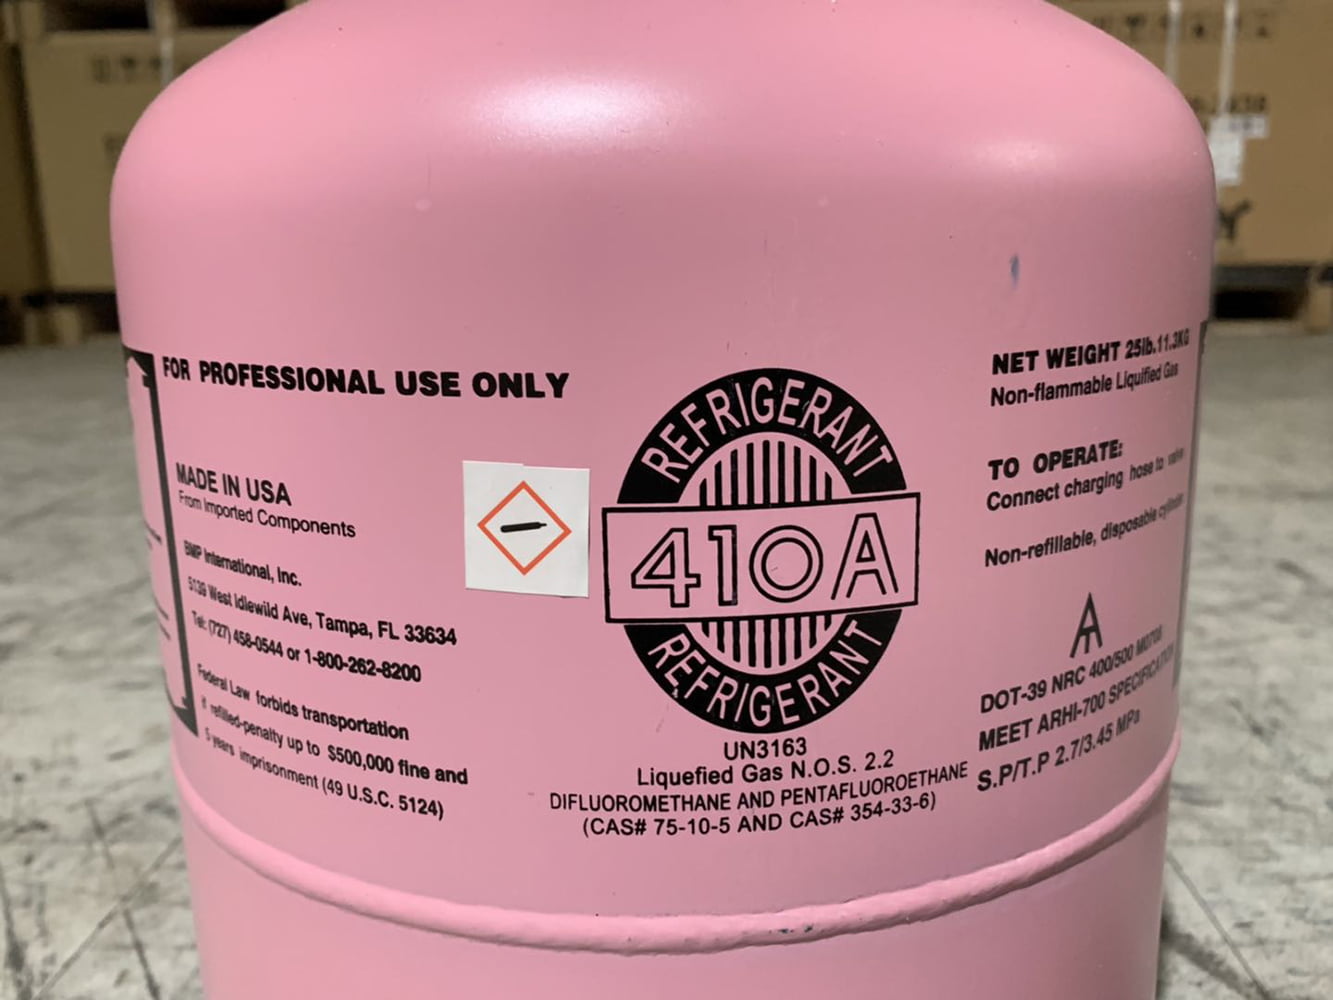 R410a 25 lb R410a Refrigerant FACTORY SEALED FREE SAME DAY SHIPPING by 3pm 